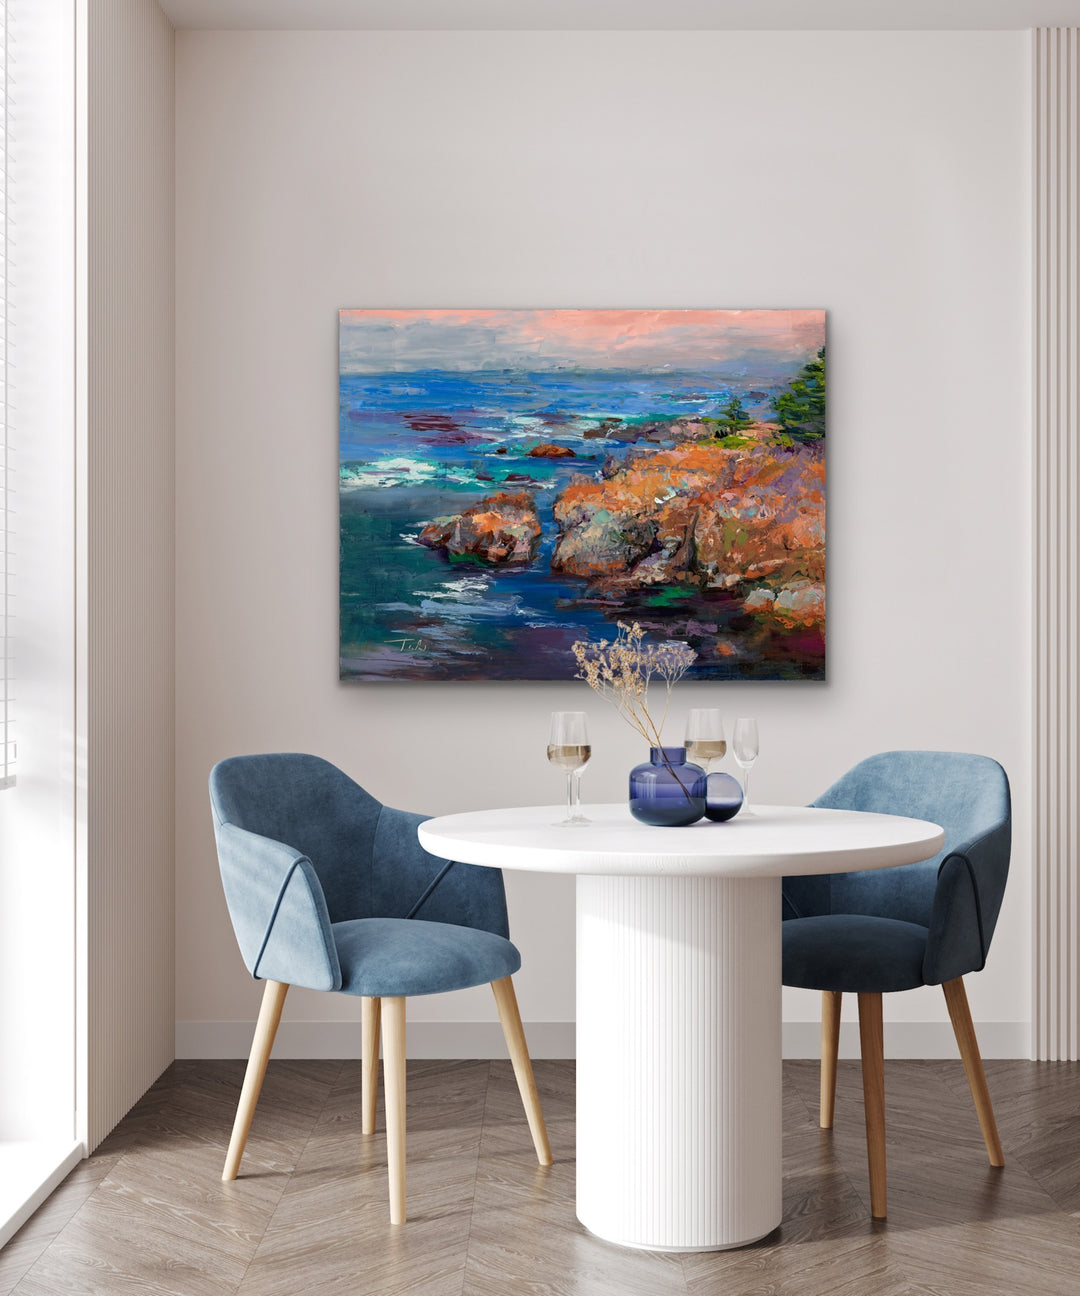 Extra large canvas print of Big Sur art hanging on simple interior wall